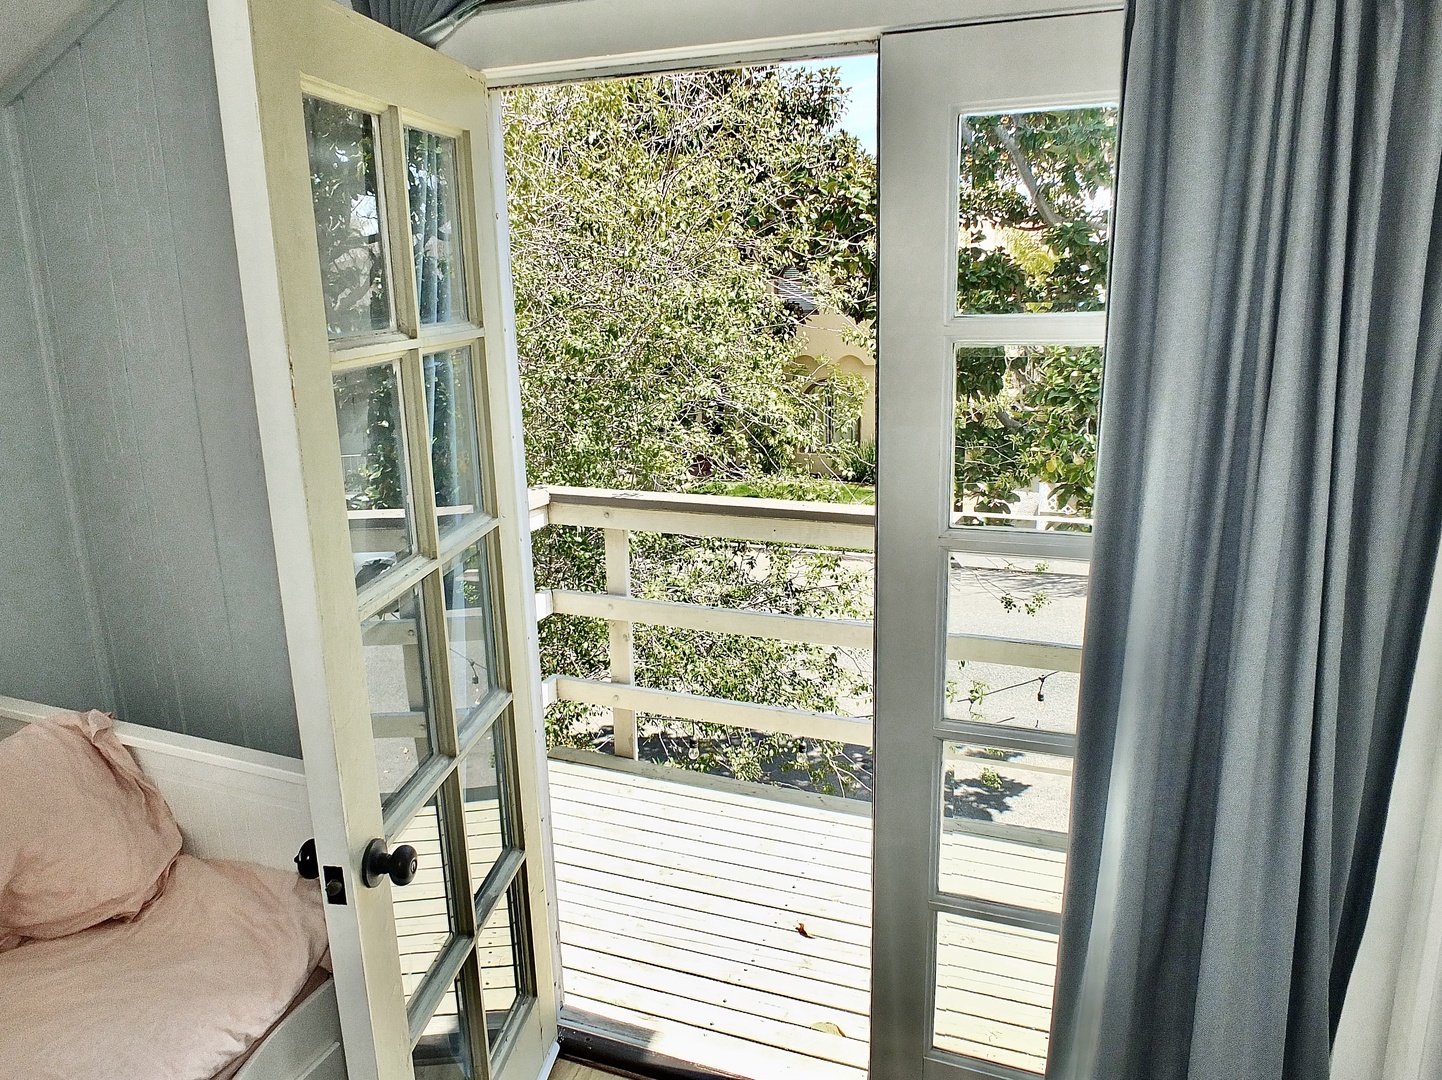 Step onto the balcony & breathe in the fresh air